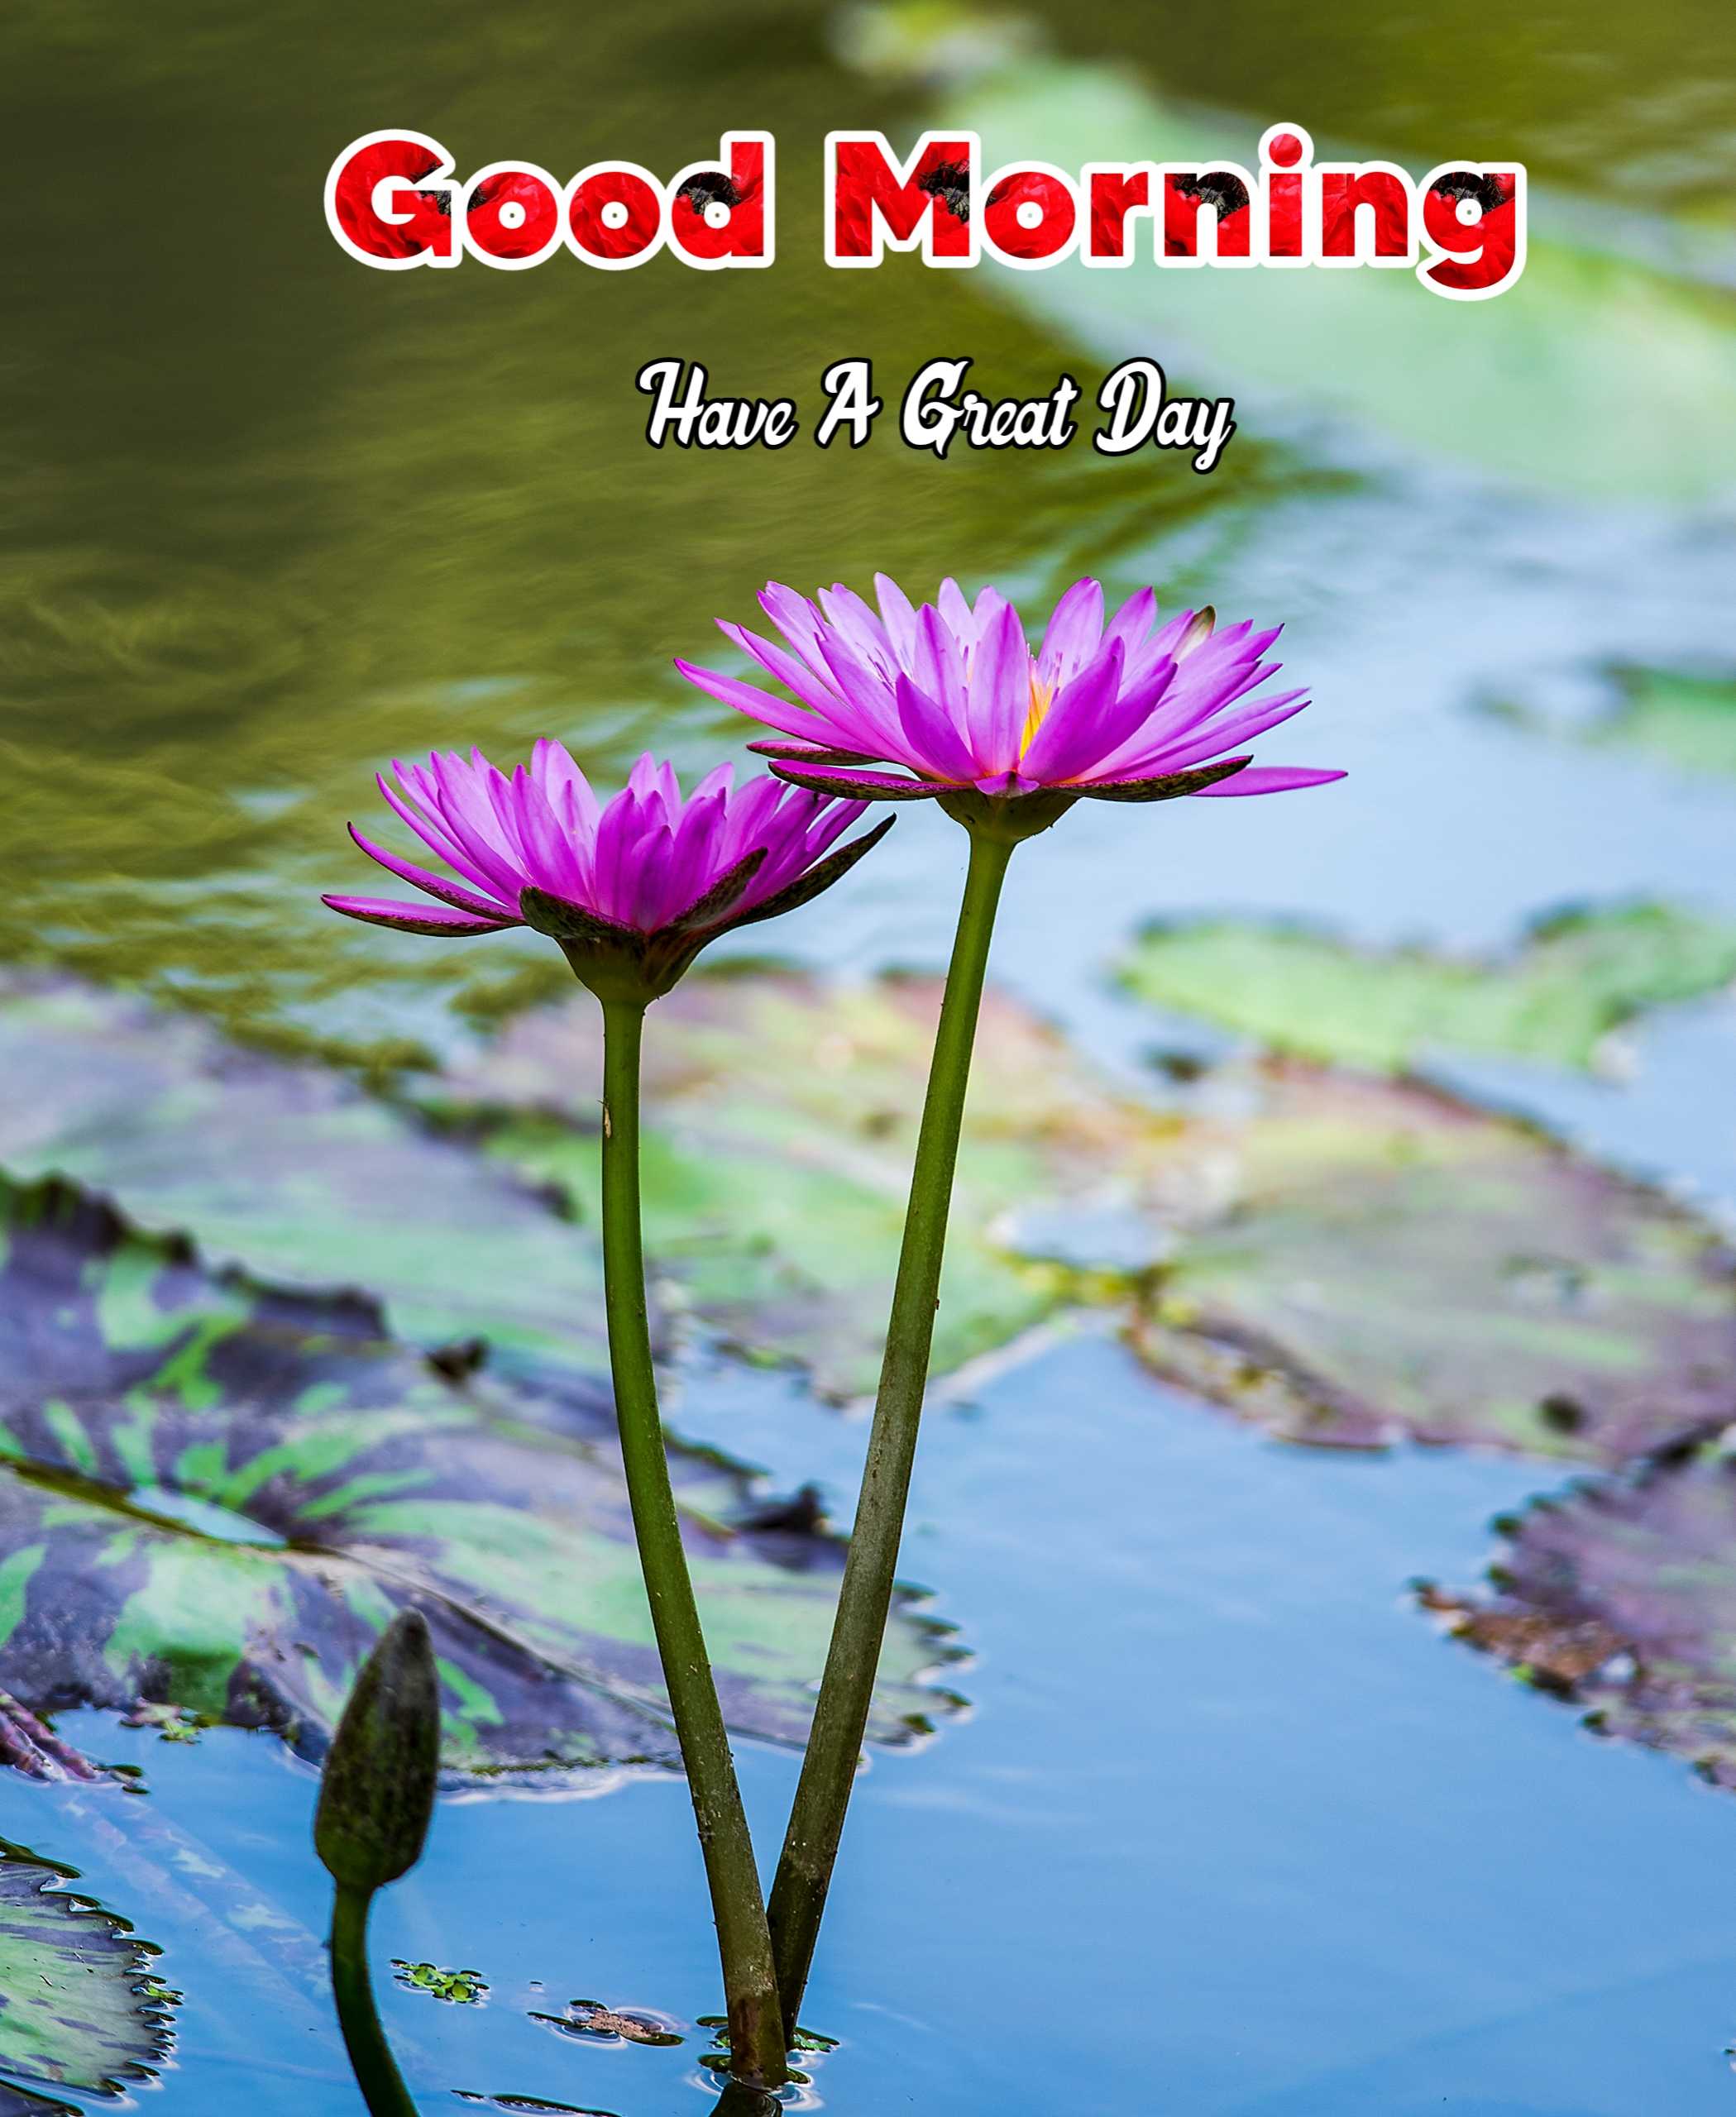 Good Morning Image With Water Flower 